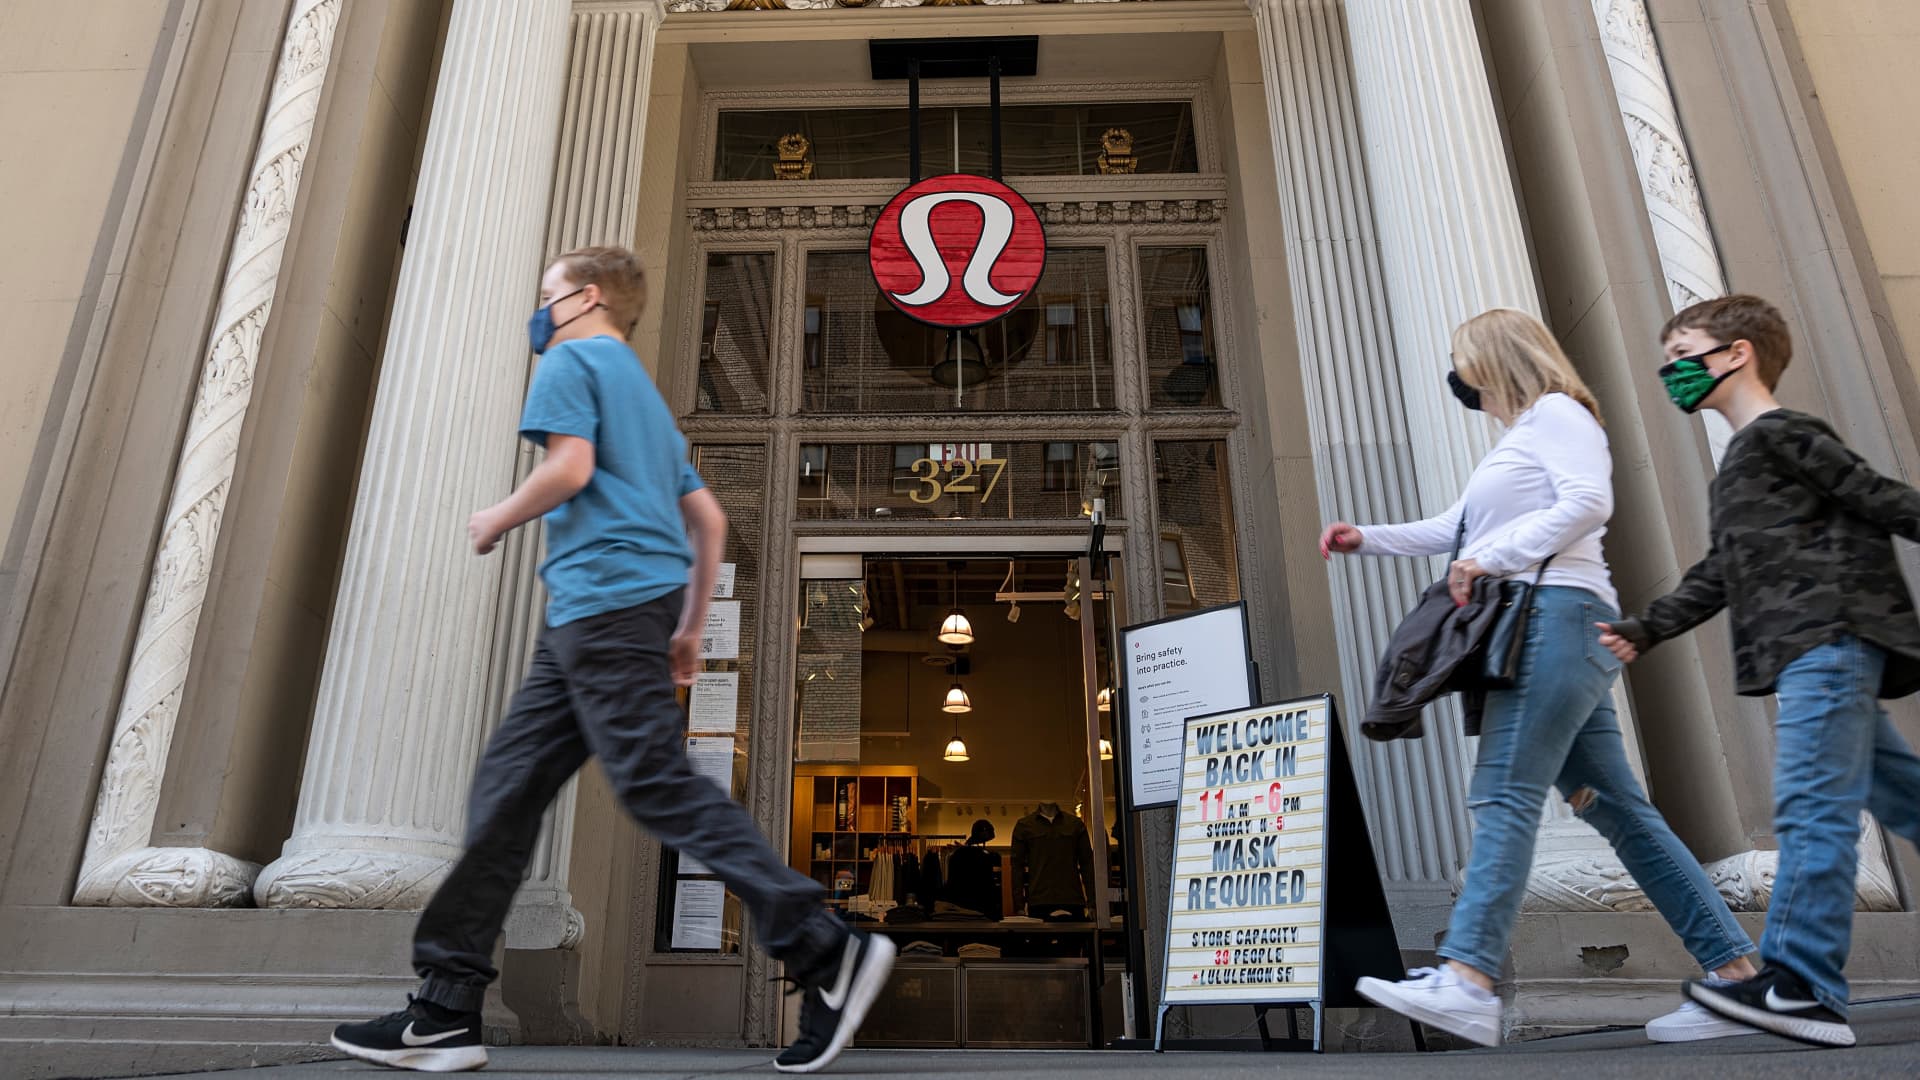 Pedestrians wearing protective masks walk past a Lululemon store in San Francisco, California, on Monday, March 29, 2021.